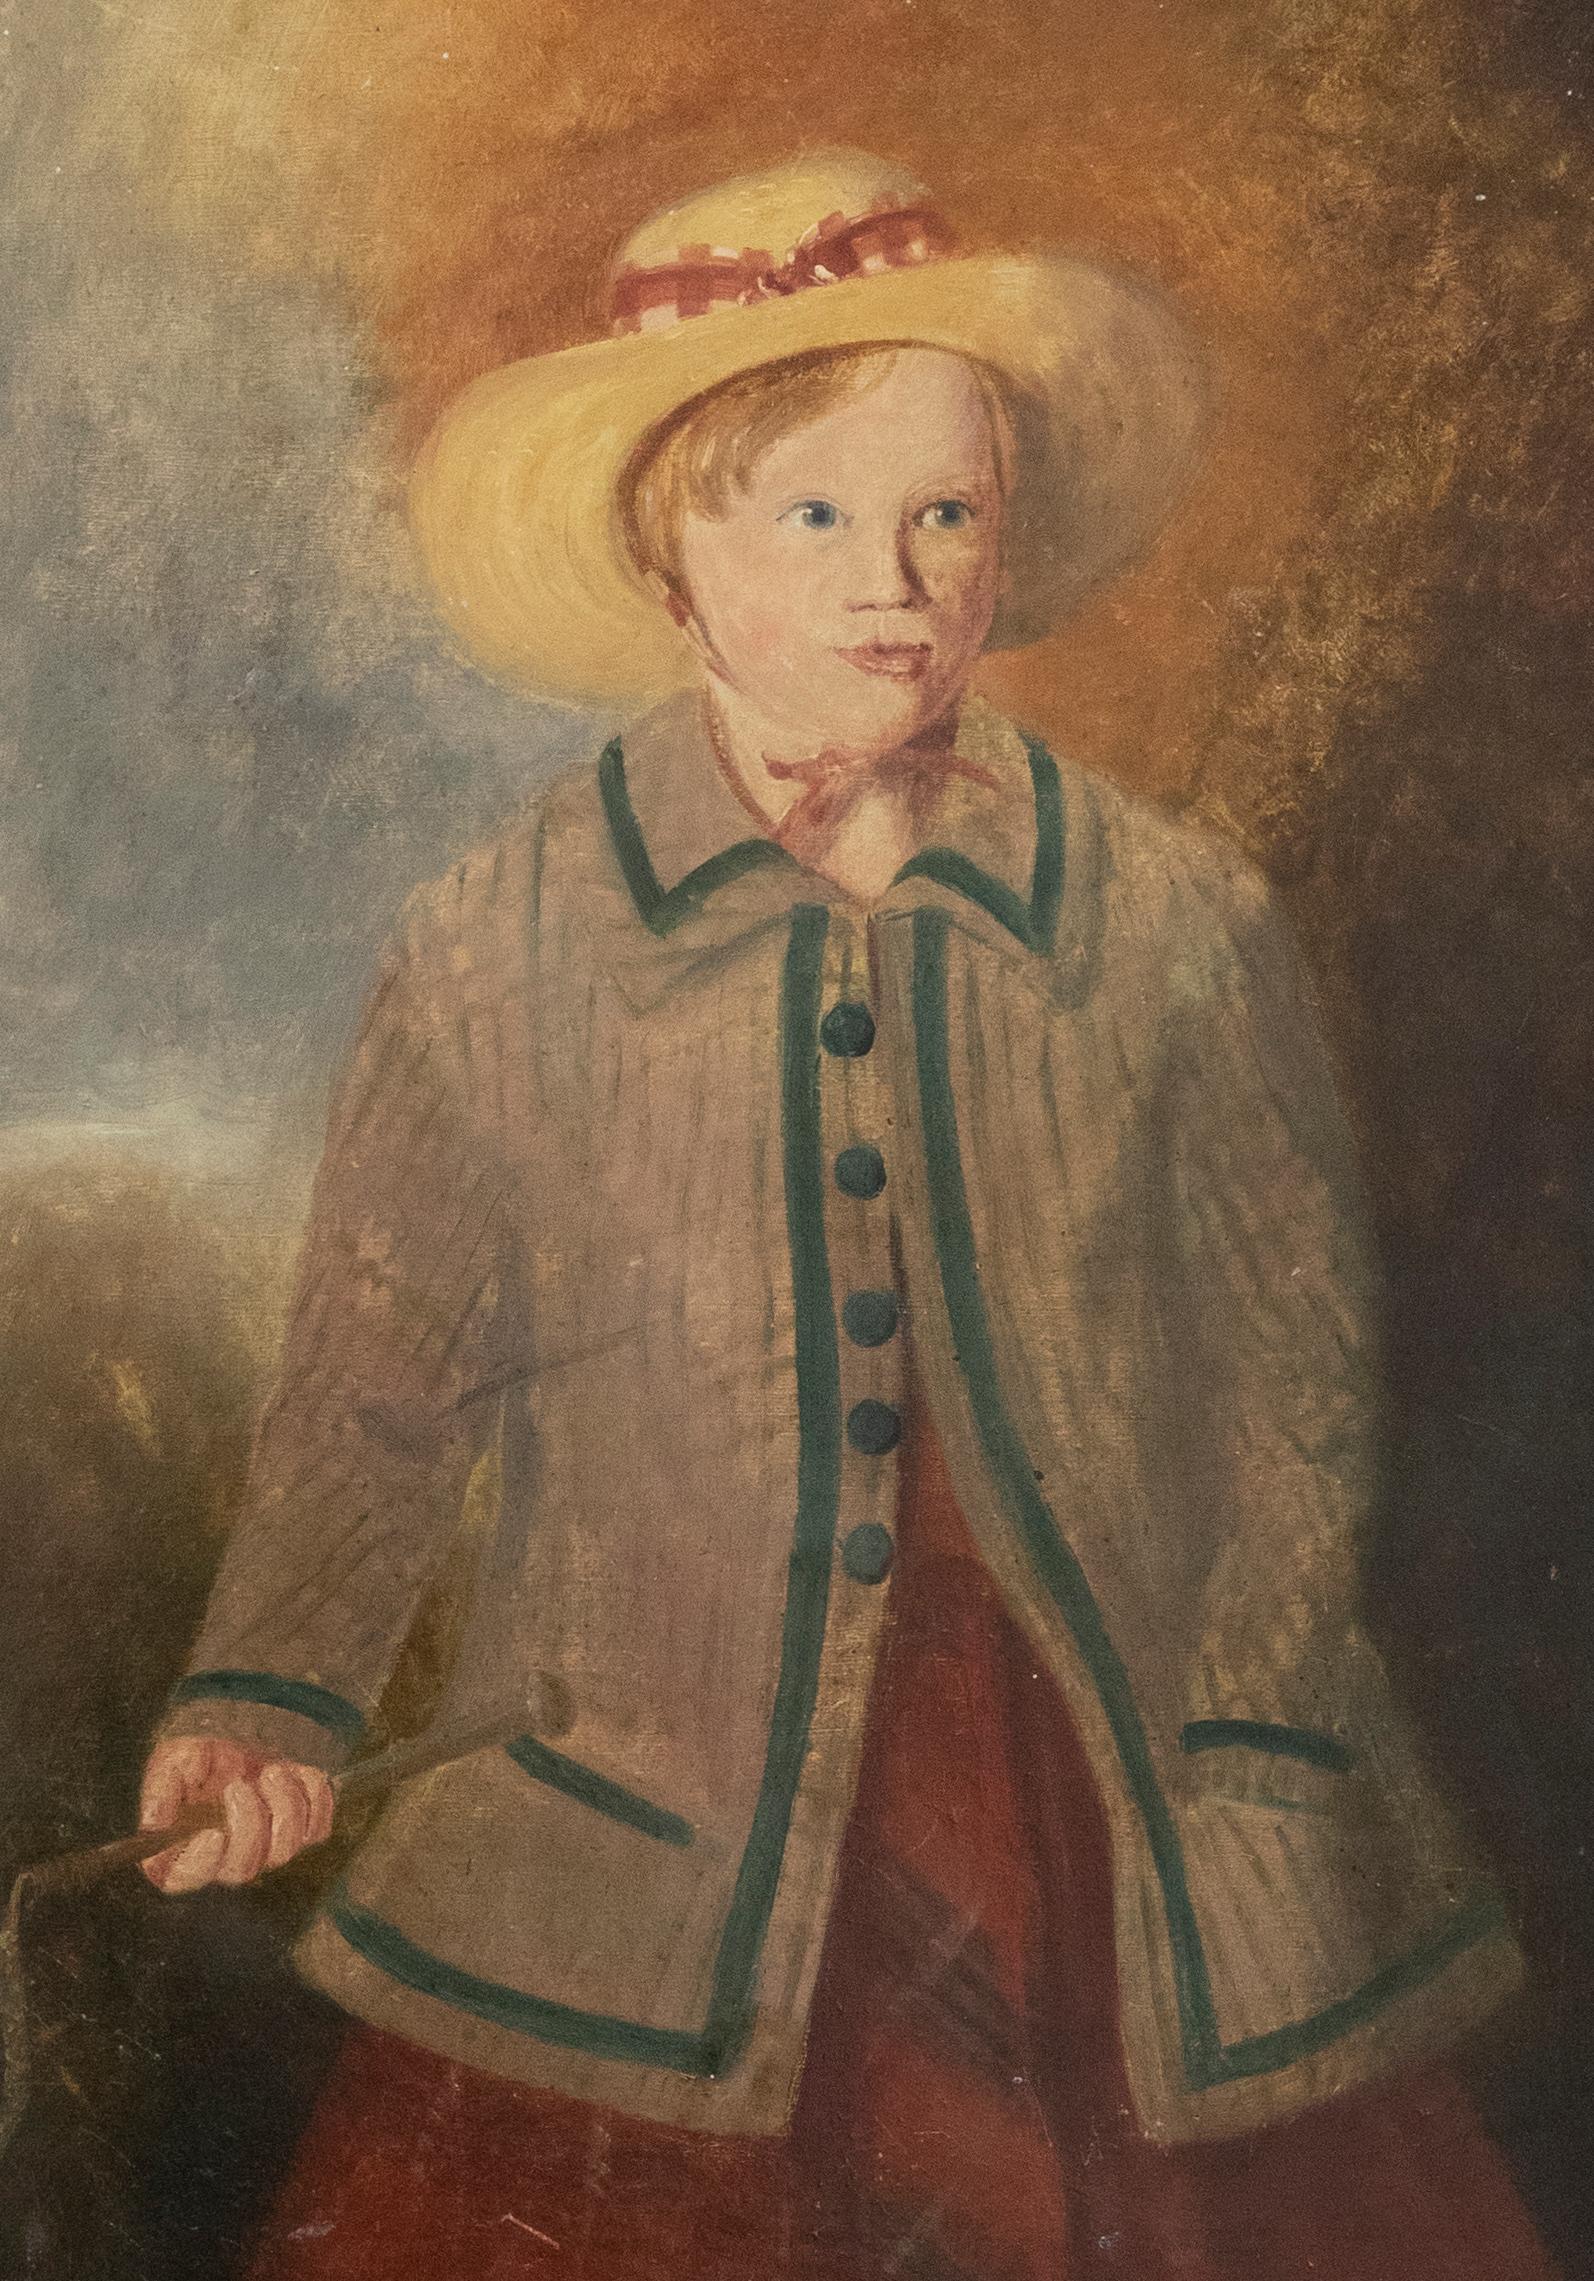 Spackman - 19th Century Folk Art Oil, Child in a Button Down Coat - Painting by Unknown